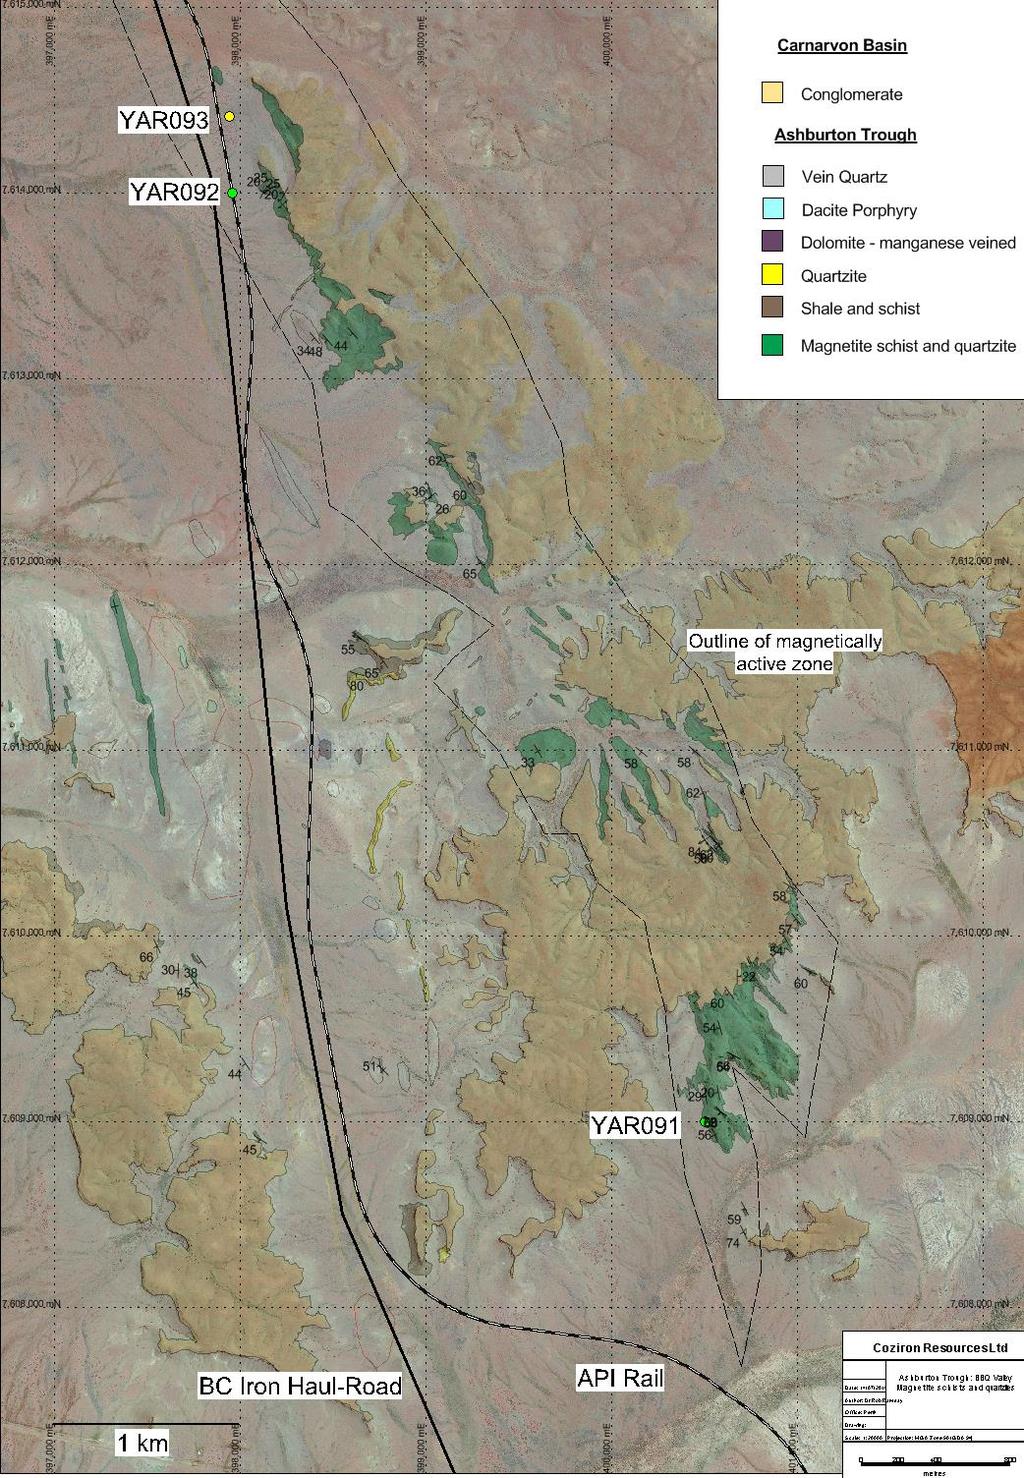 Yarraloola Project Unique Magnetite Discovery 3 RC drill holes in late 2014 tested targets within magnetically active zones over a 12km strike length up to 1km wide.